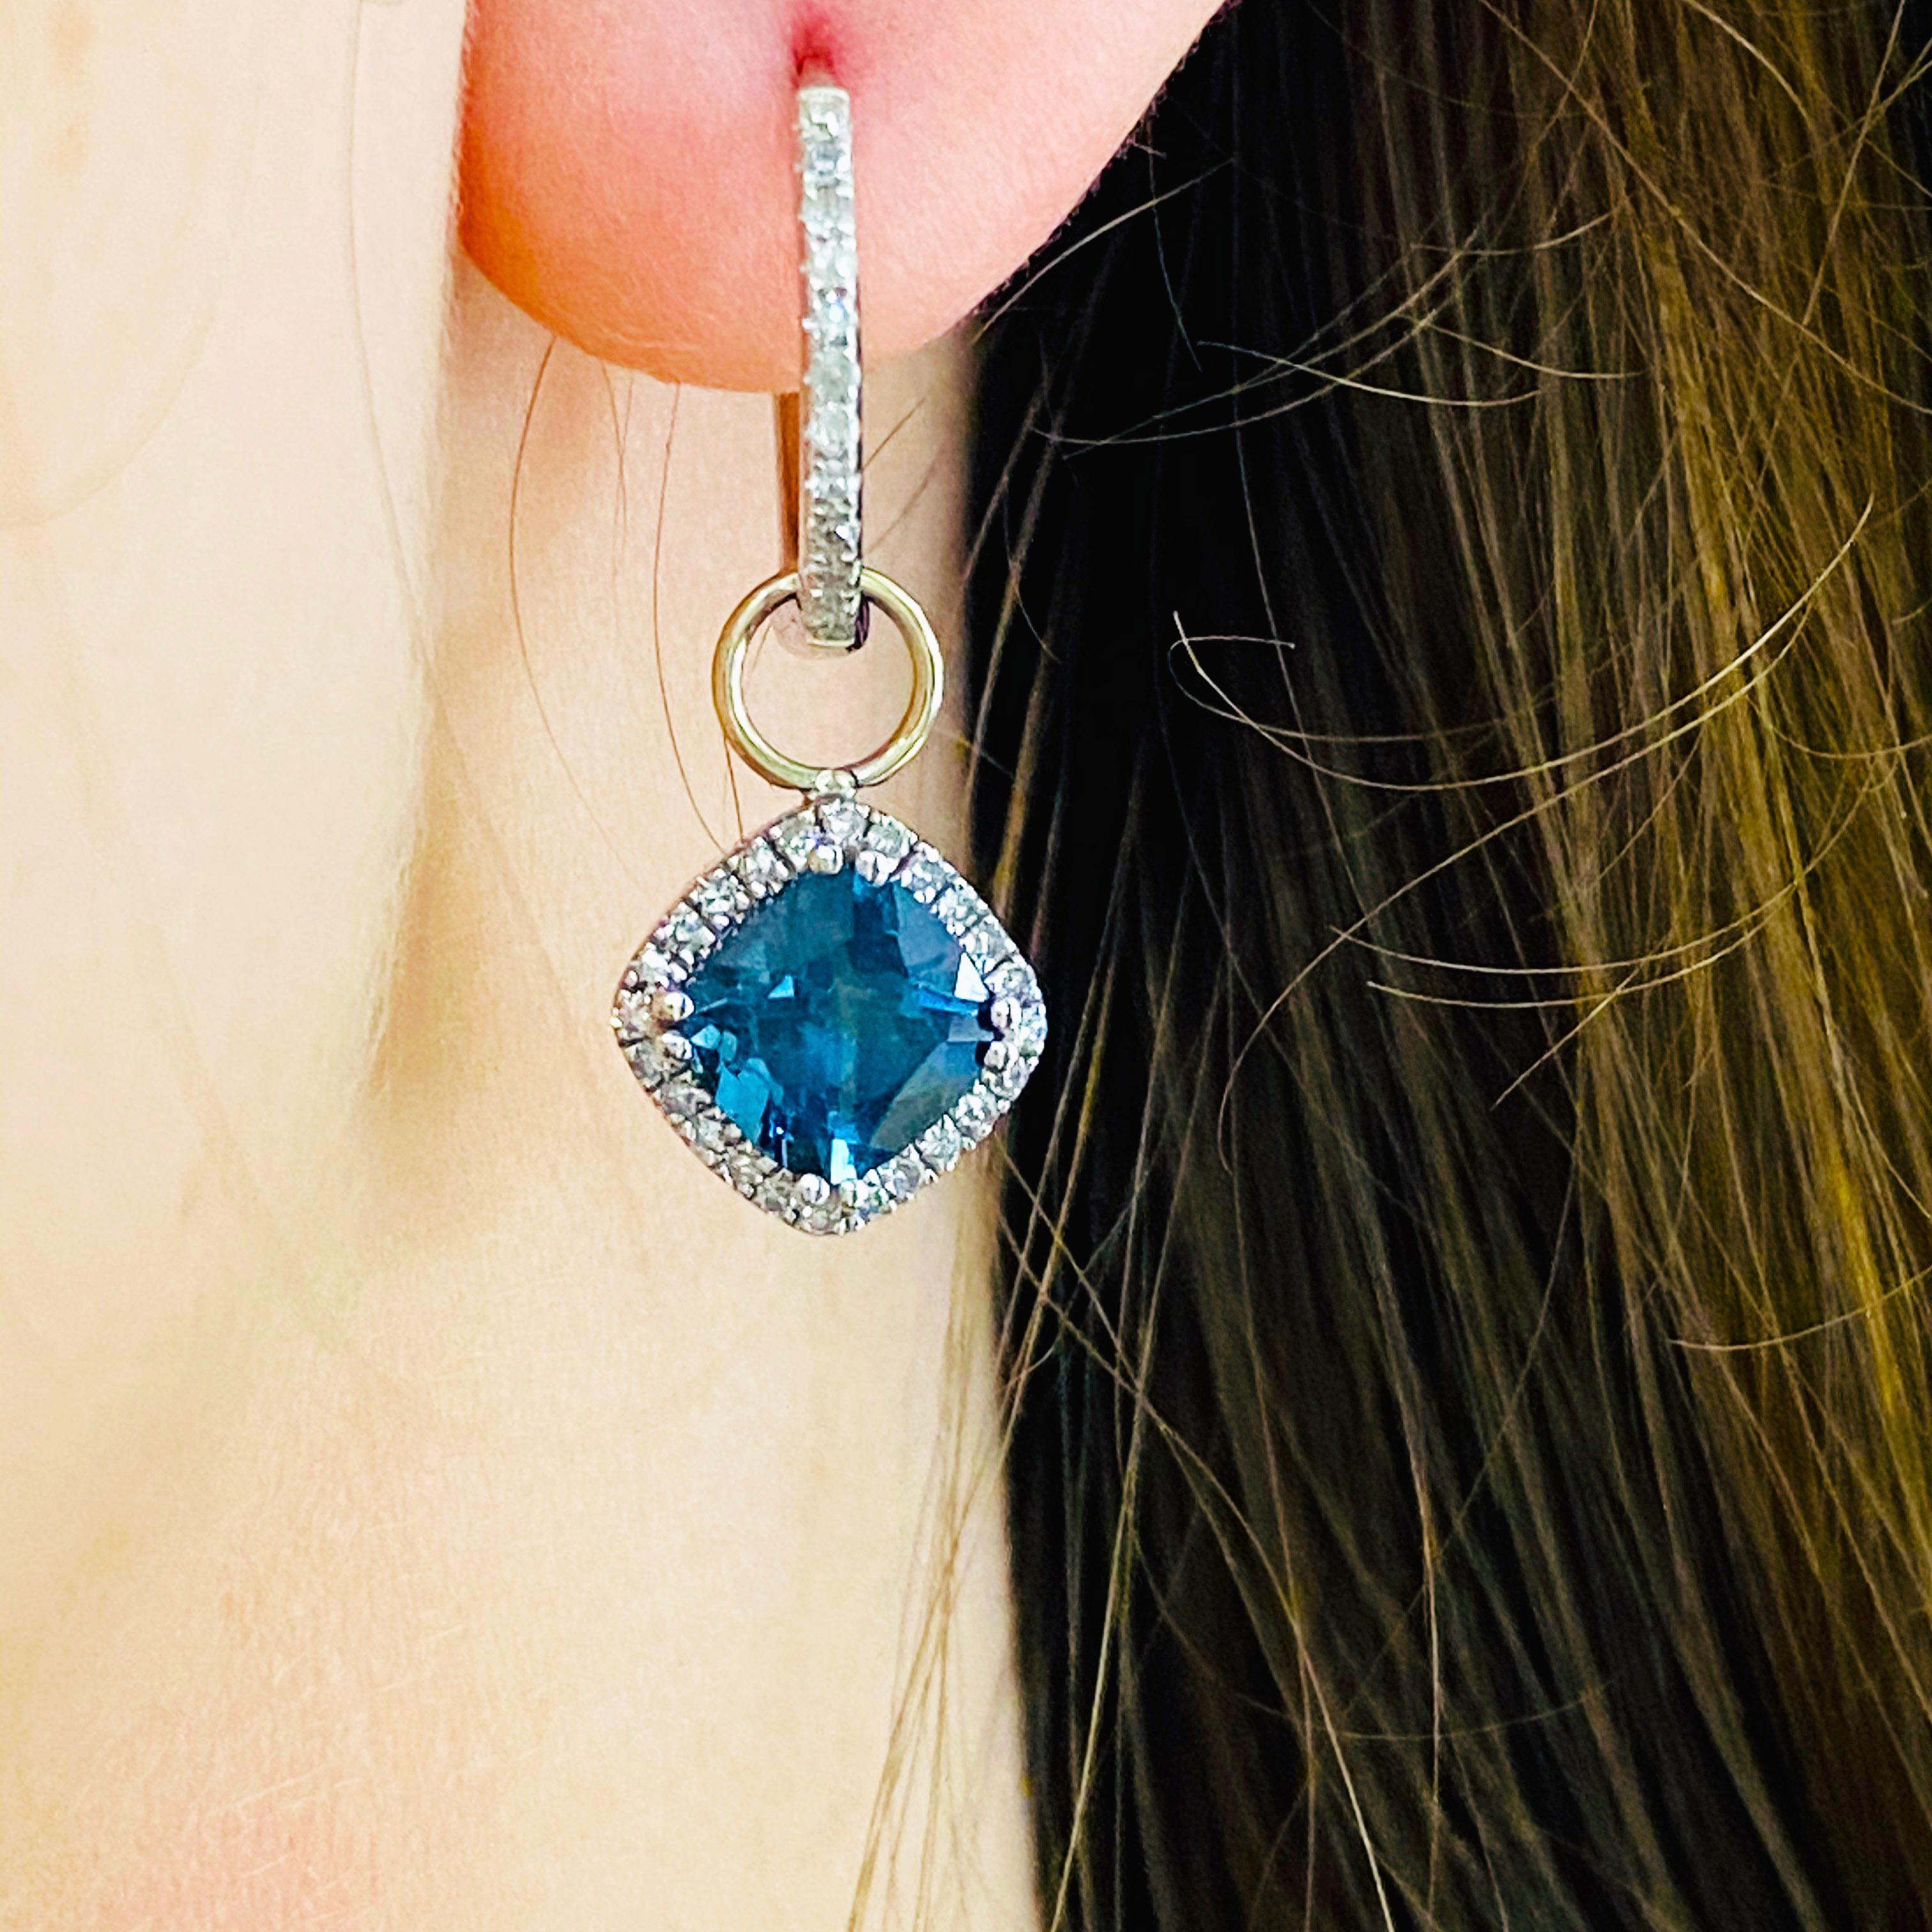 These stunning earring charms are the perfect way to dress up any pair of hoops! With polished 14k white gold surrounding brilliant blue sapphires and dripping with white diamonds, these charms make the perfect chic and modern accessory for any